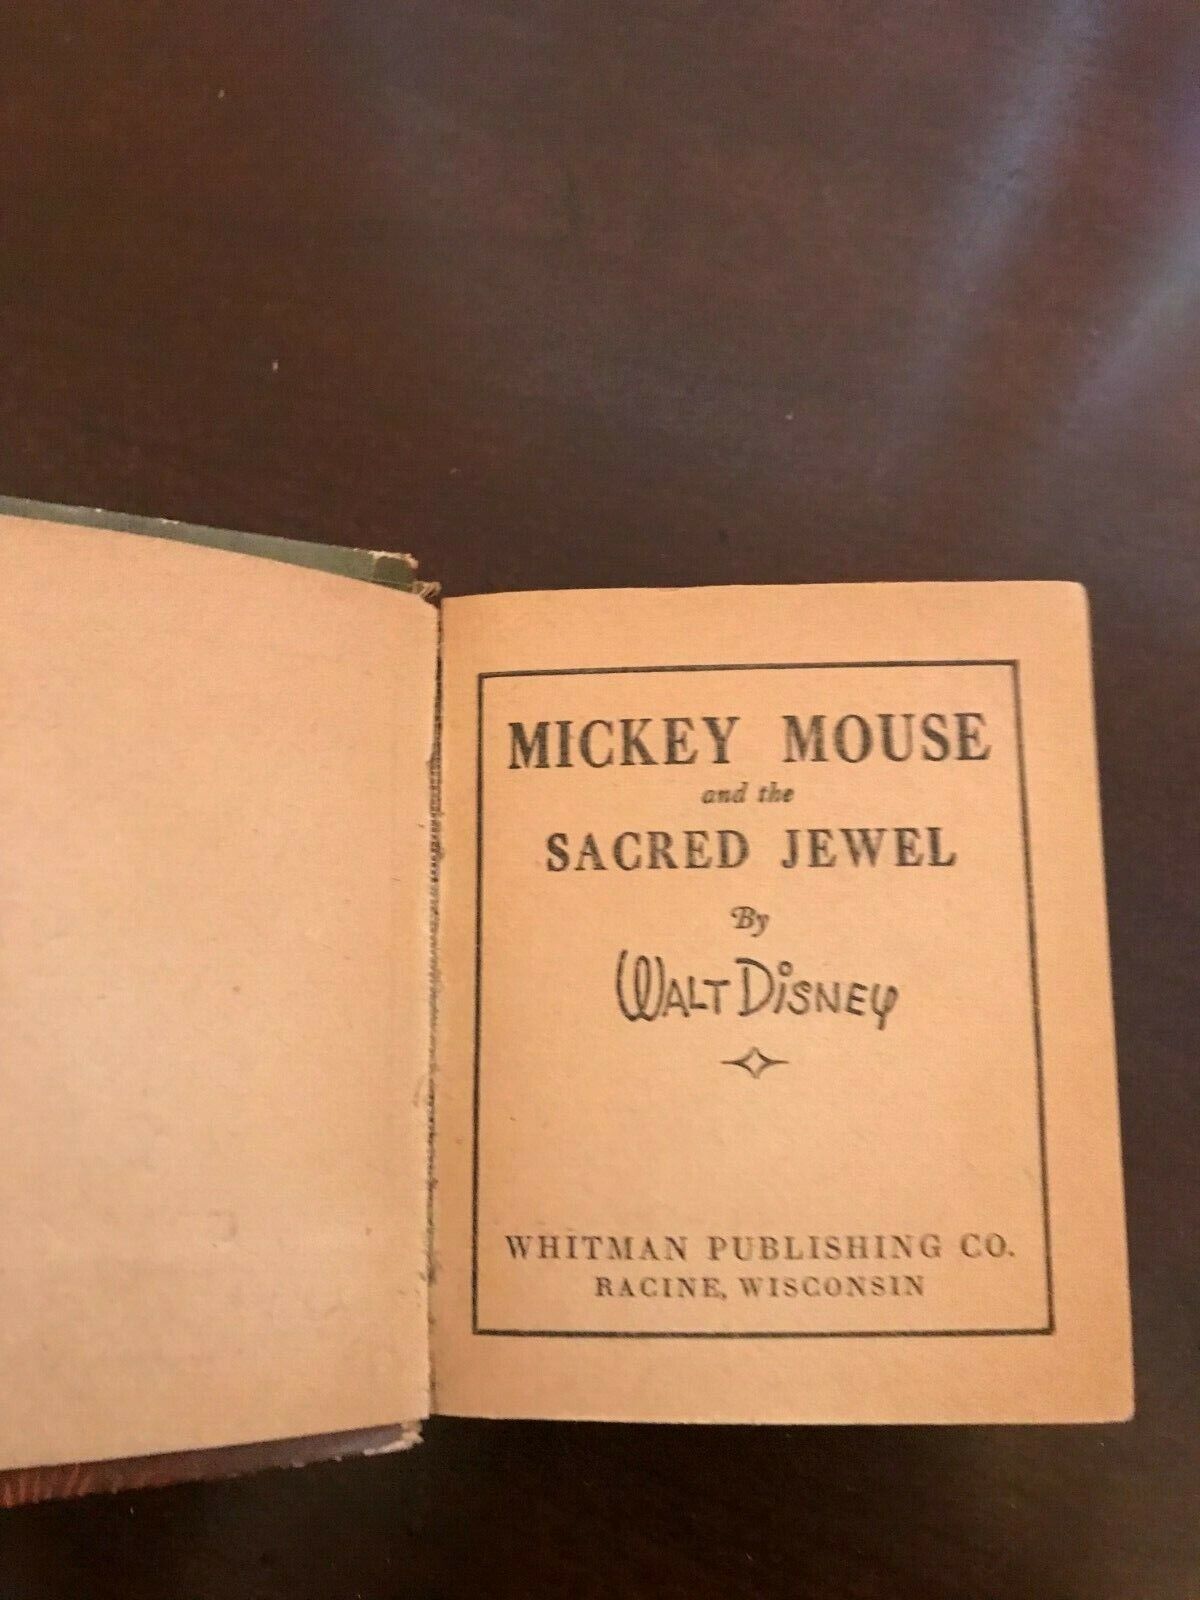 Disney vintage books - The Big Little Book featuring Mickey Mouse Без бренда - фотография #11